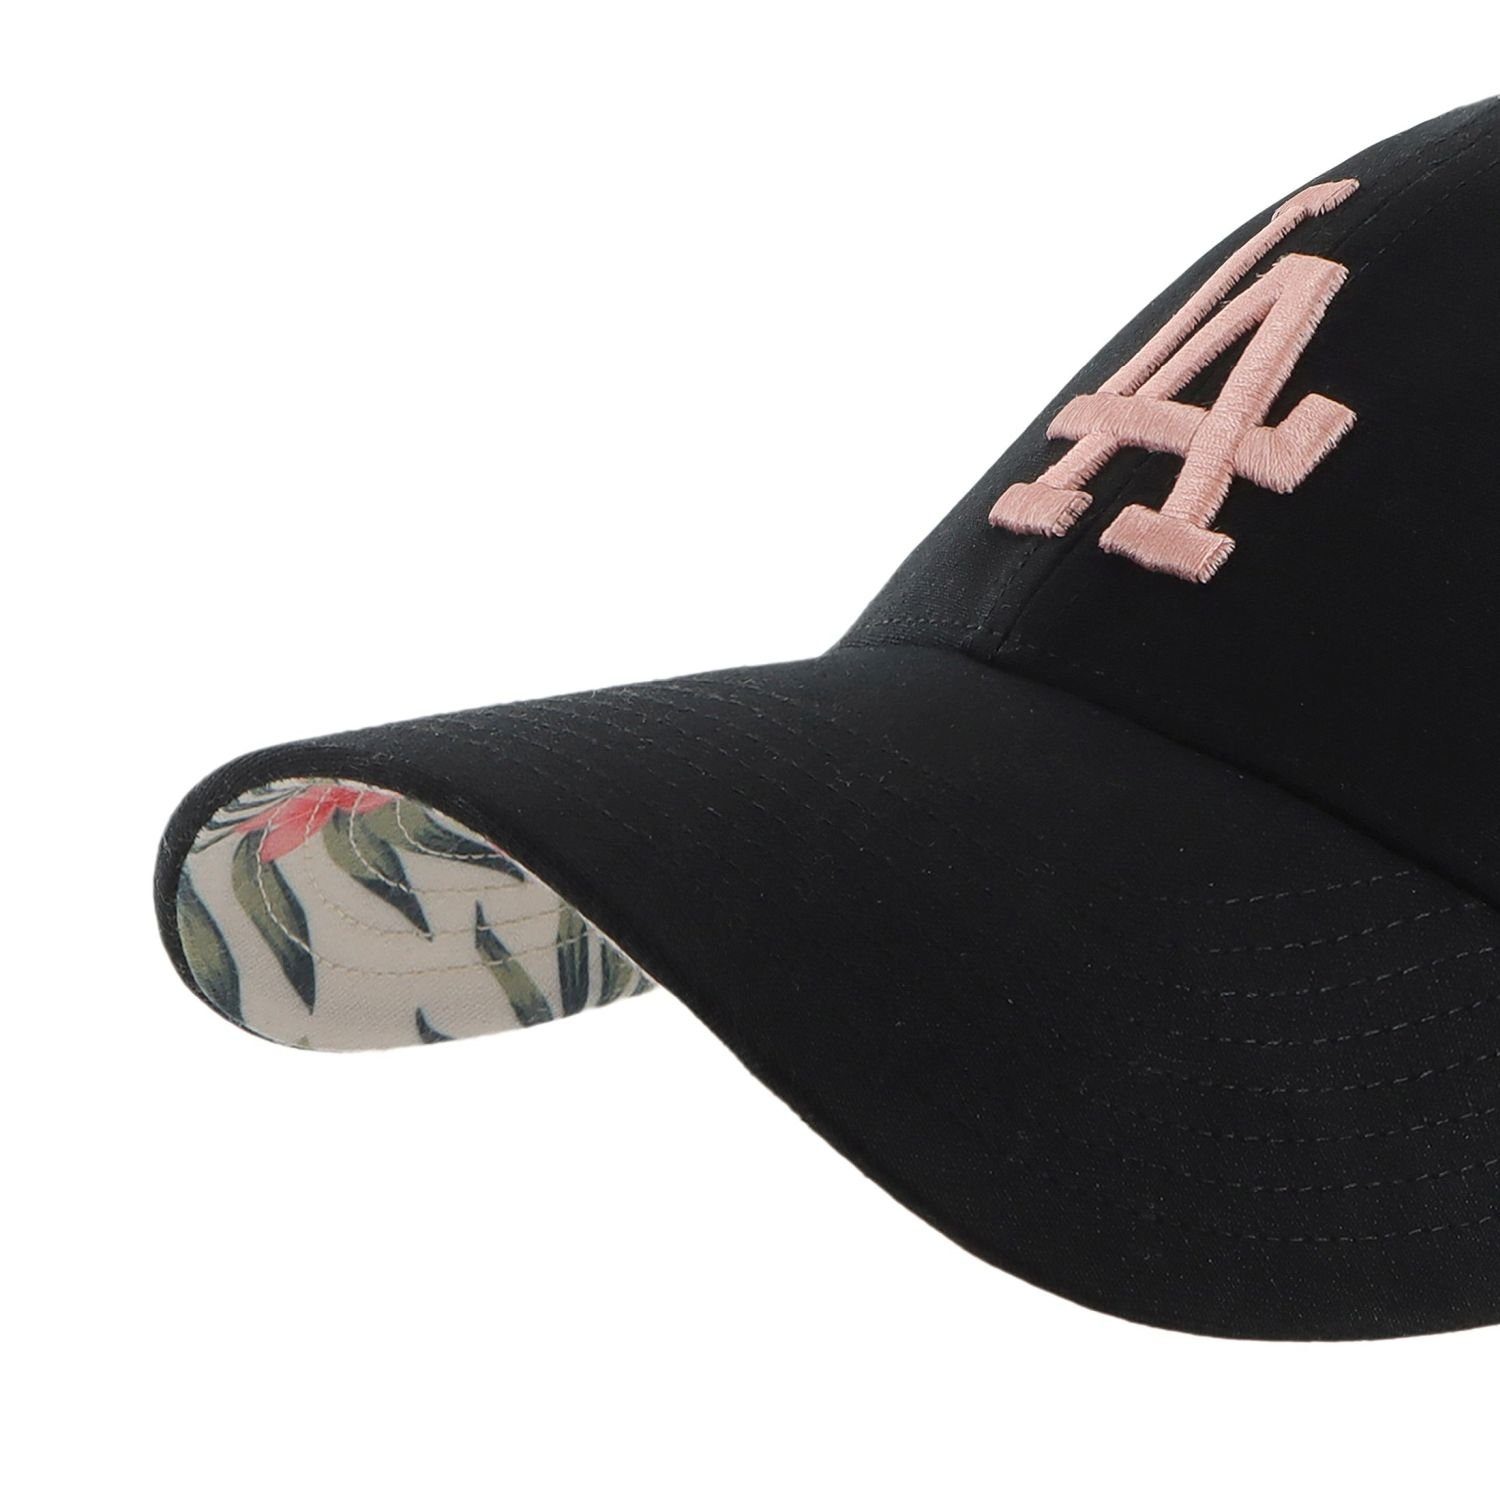 '47 Baseball Cap Relaxed Fit Dodgers Brand Los COASTAL FLORAL Angeles